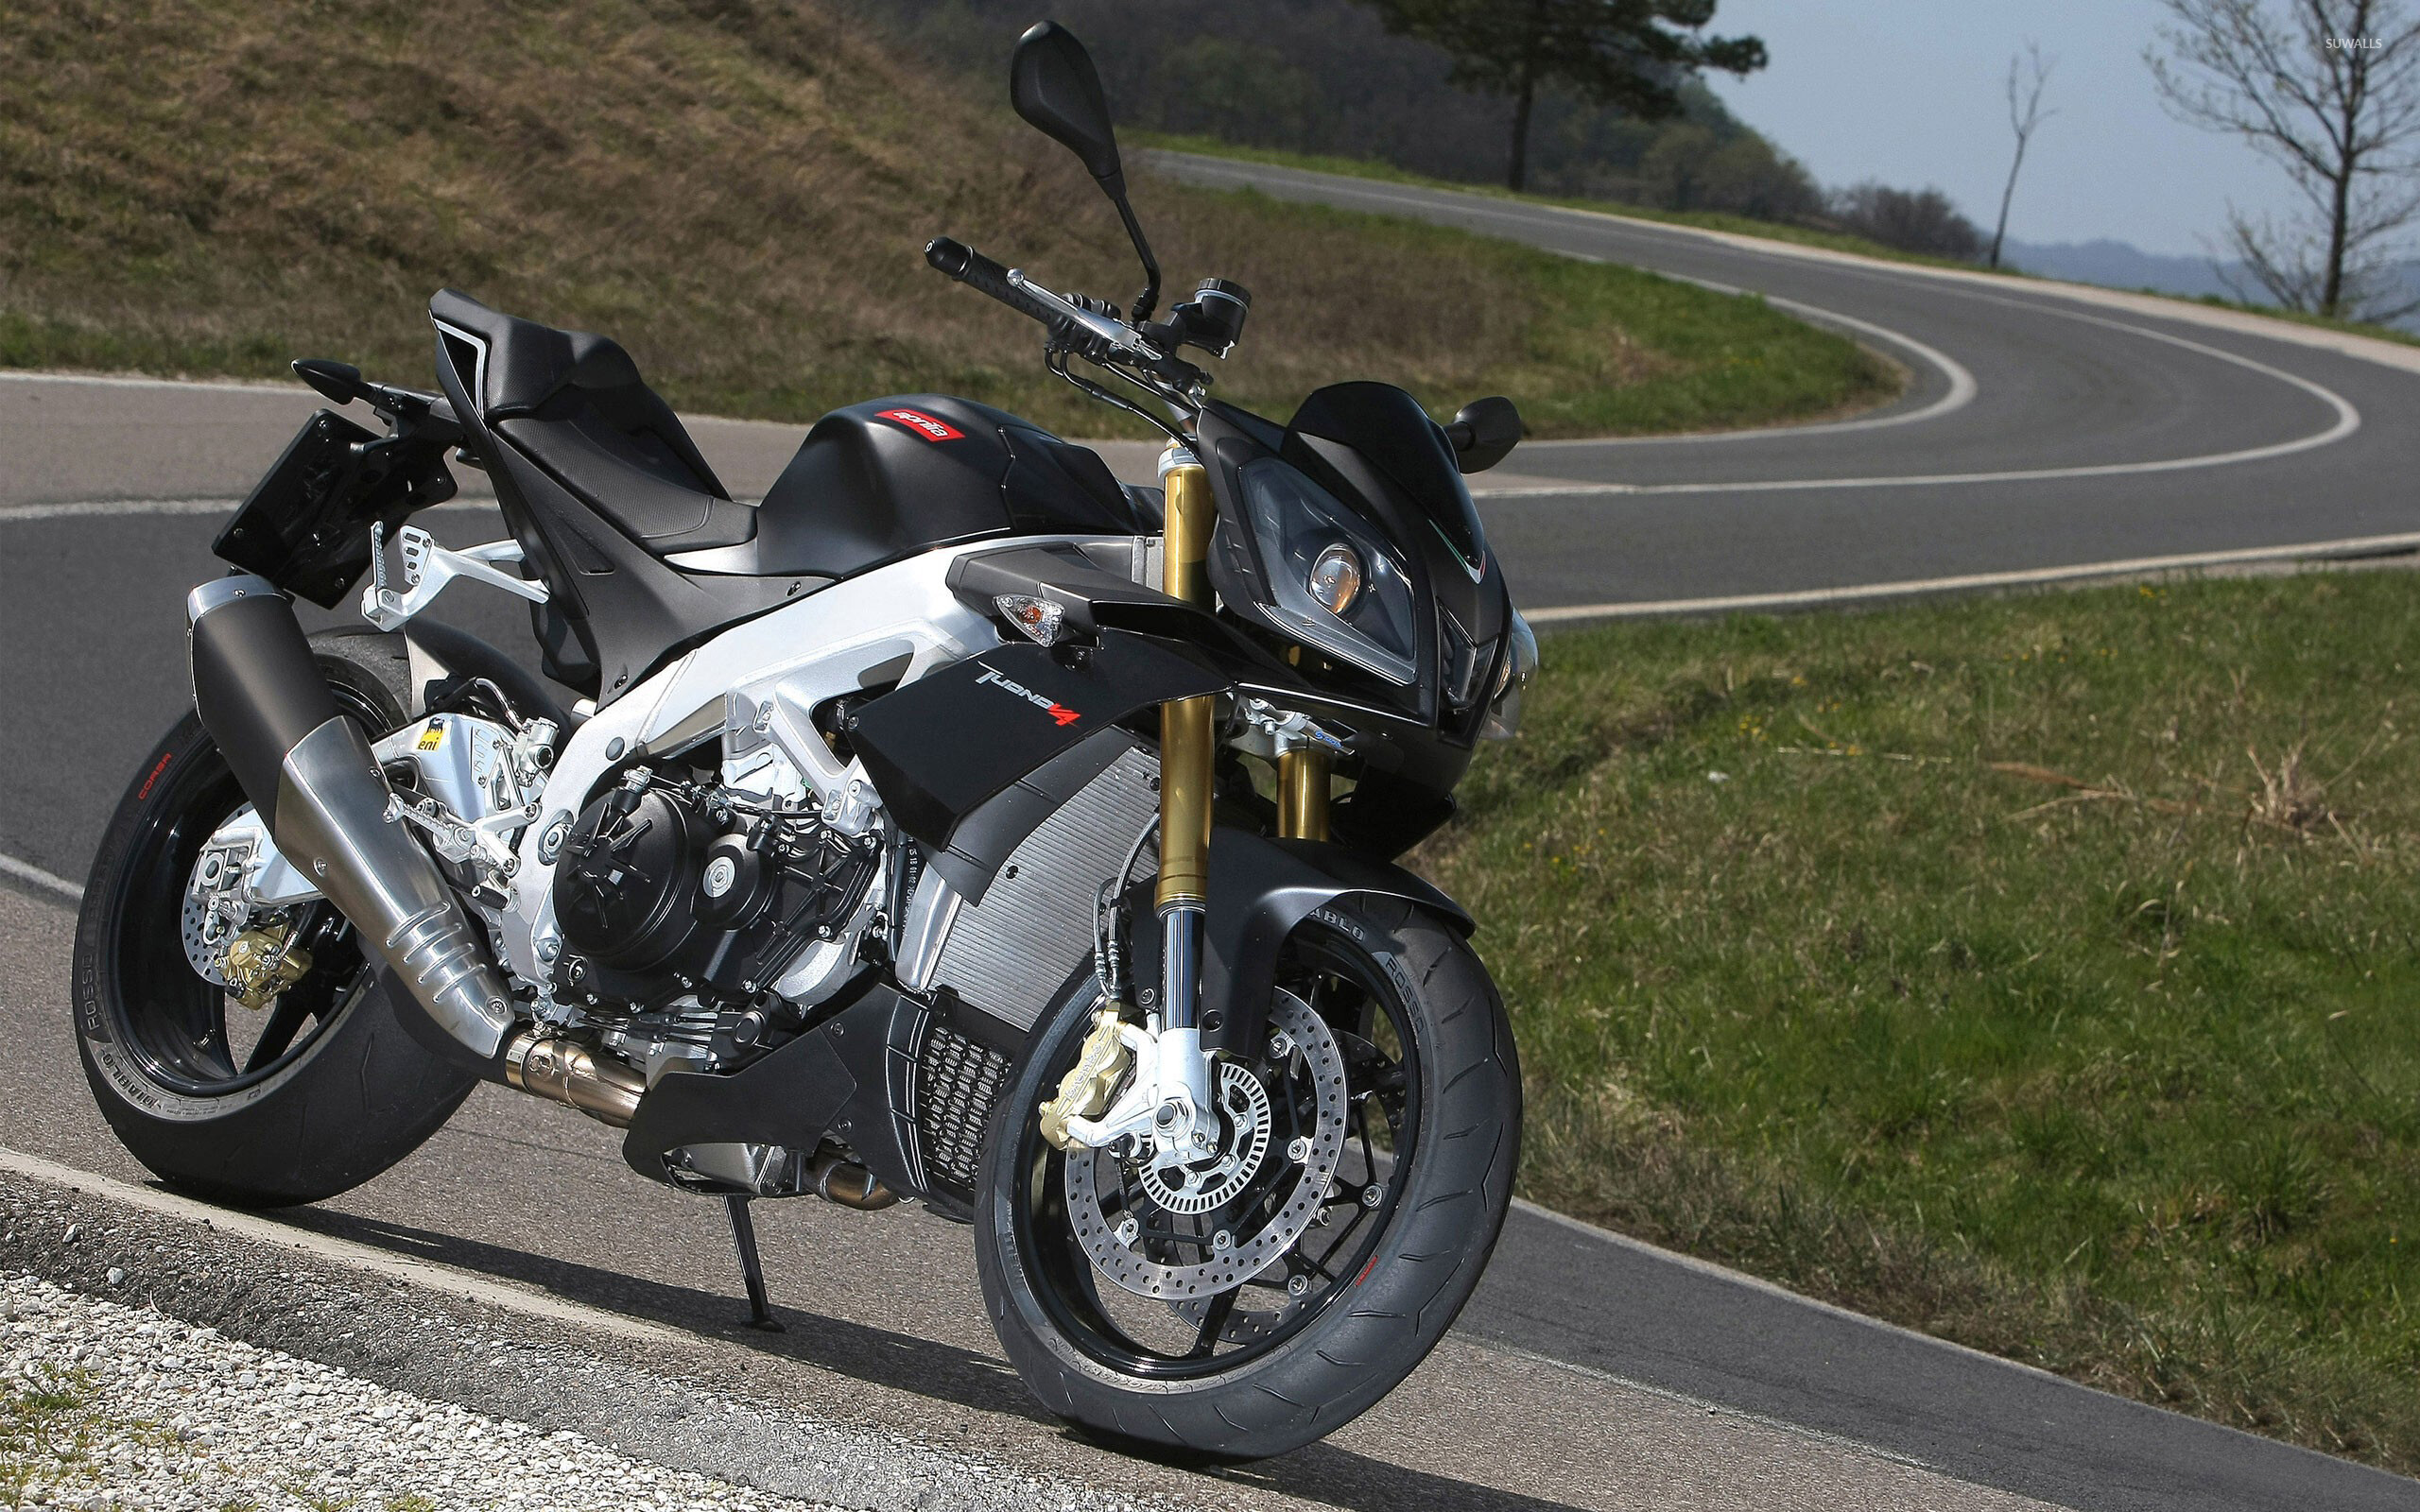 Aprilia: Tuono V4, A naked motorcycle manufactured since 2002. 2560x1600 HD Wallpaper.